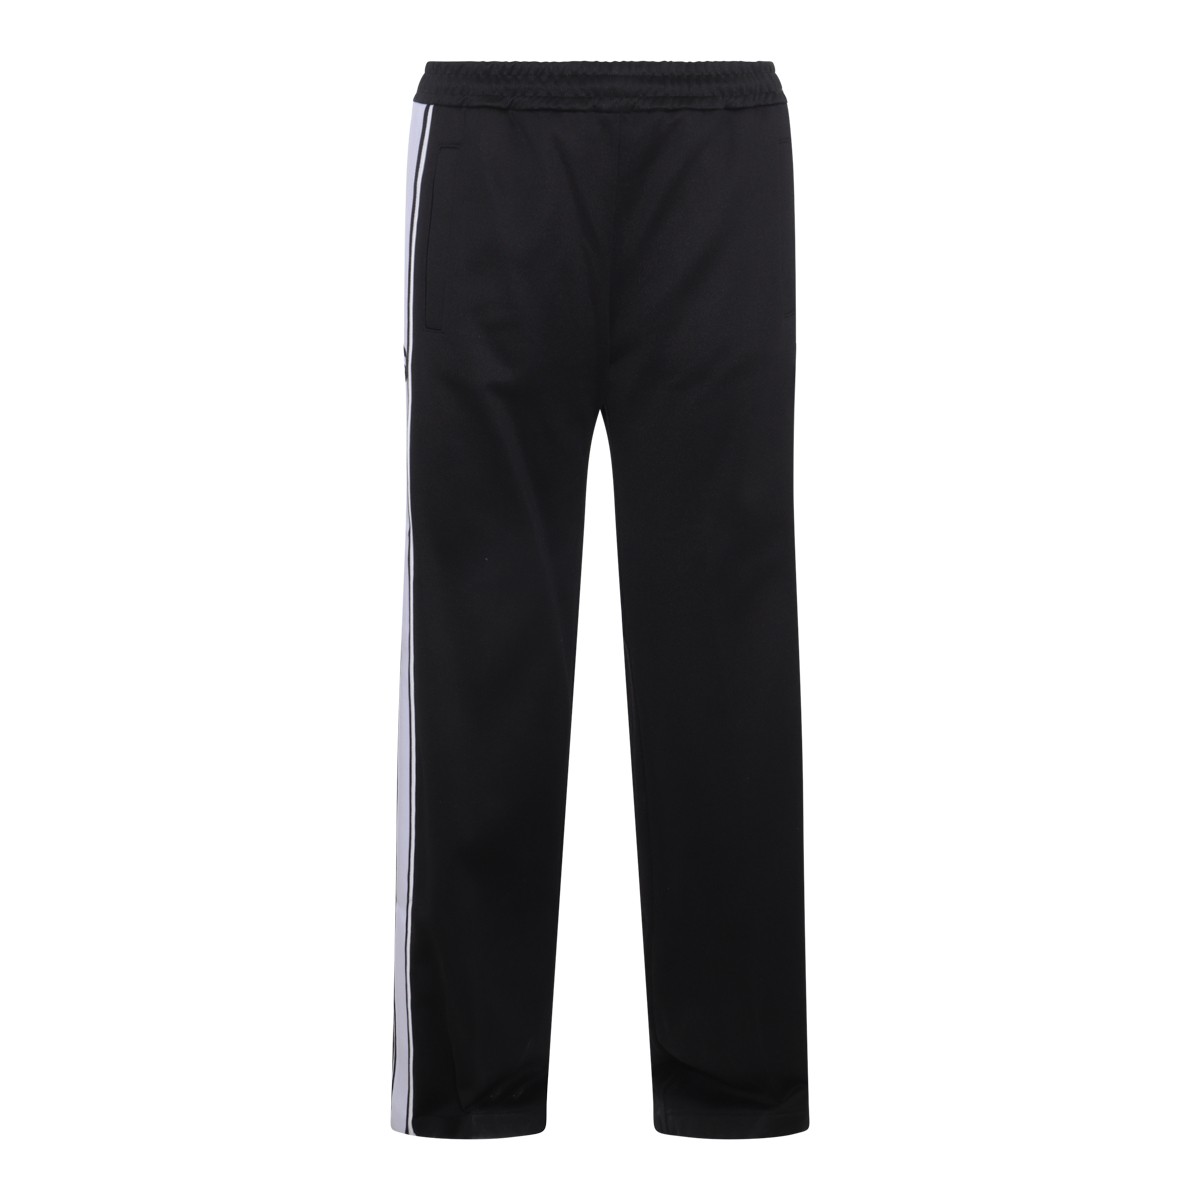 BLACK AND WHITE COTTON BLEND TRACK PANTS